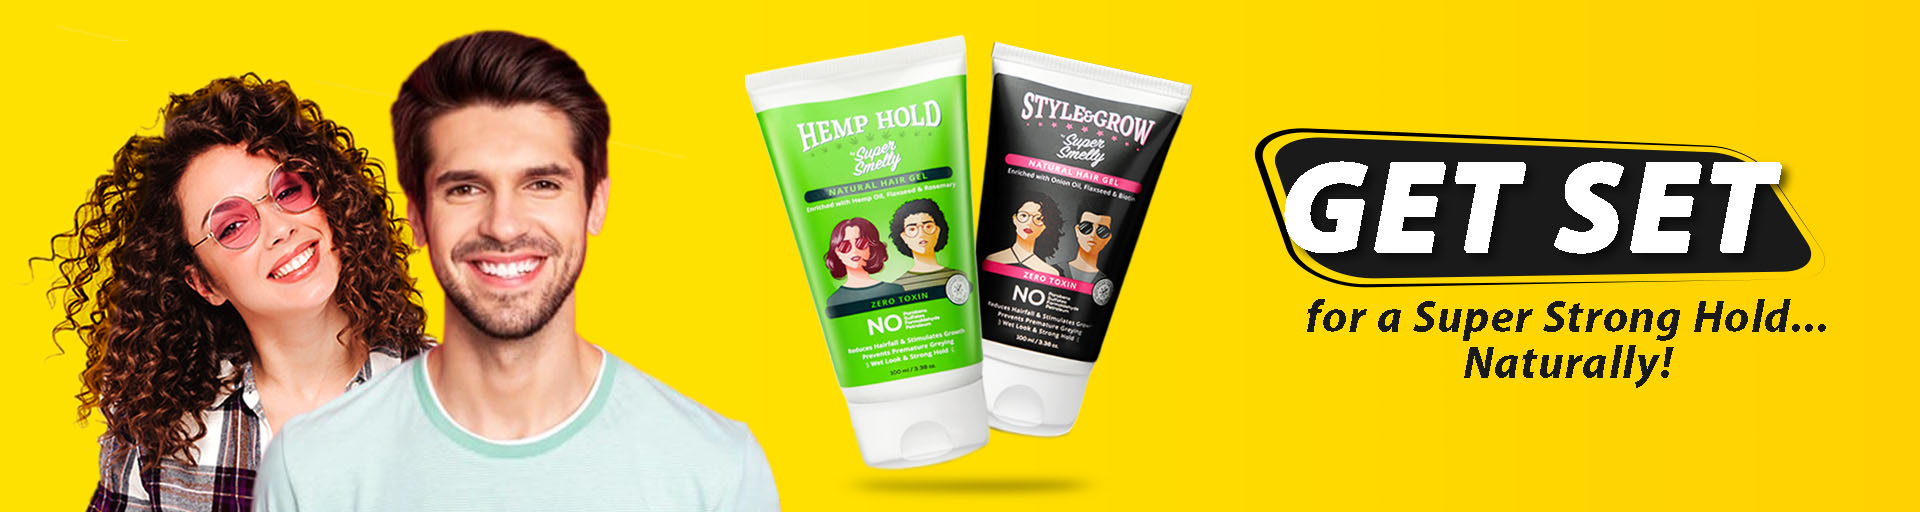 Supersmelly hemp hold hair gel | supersmelly style and grow onion hair gel